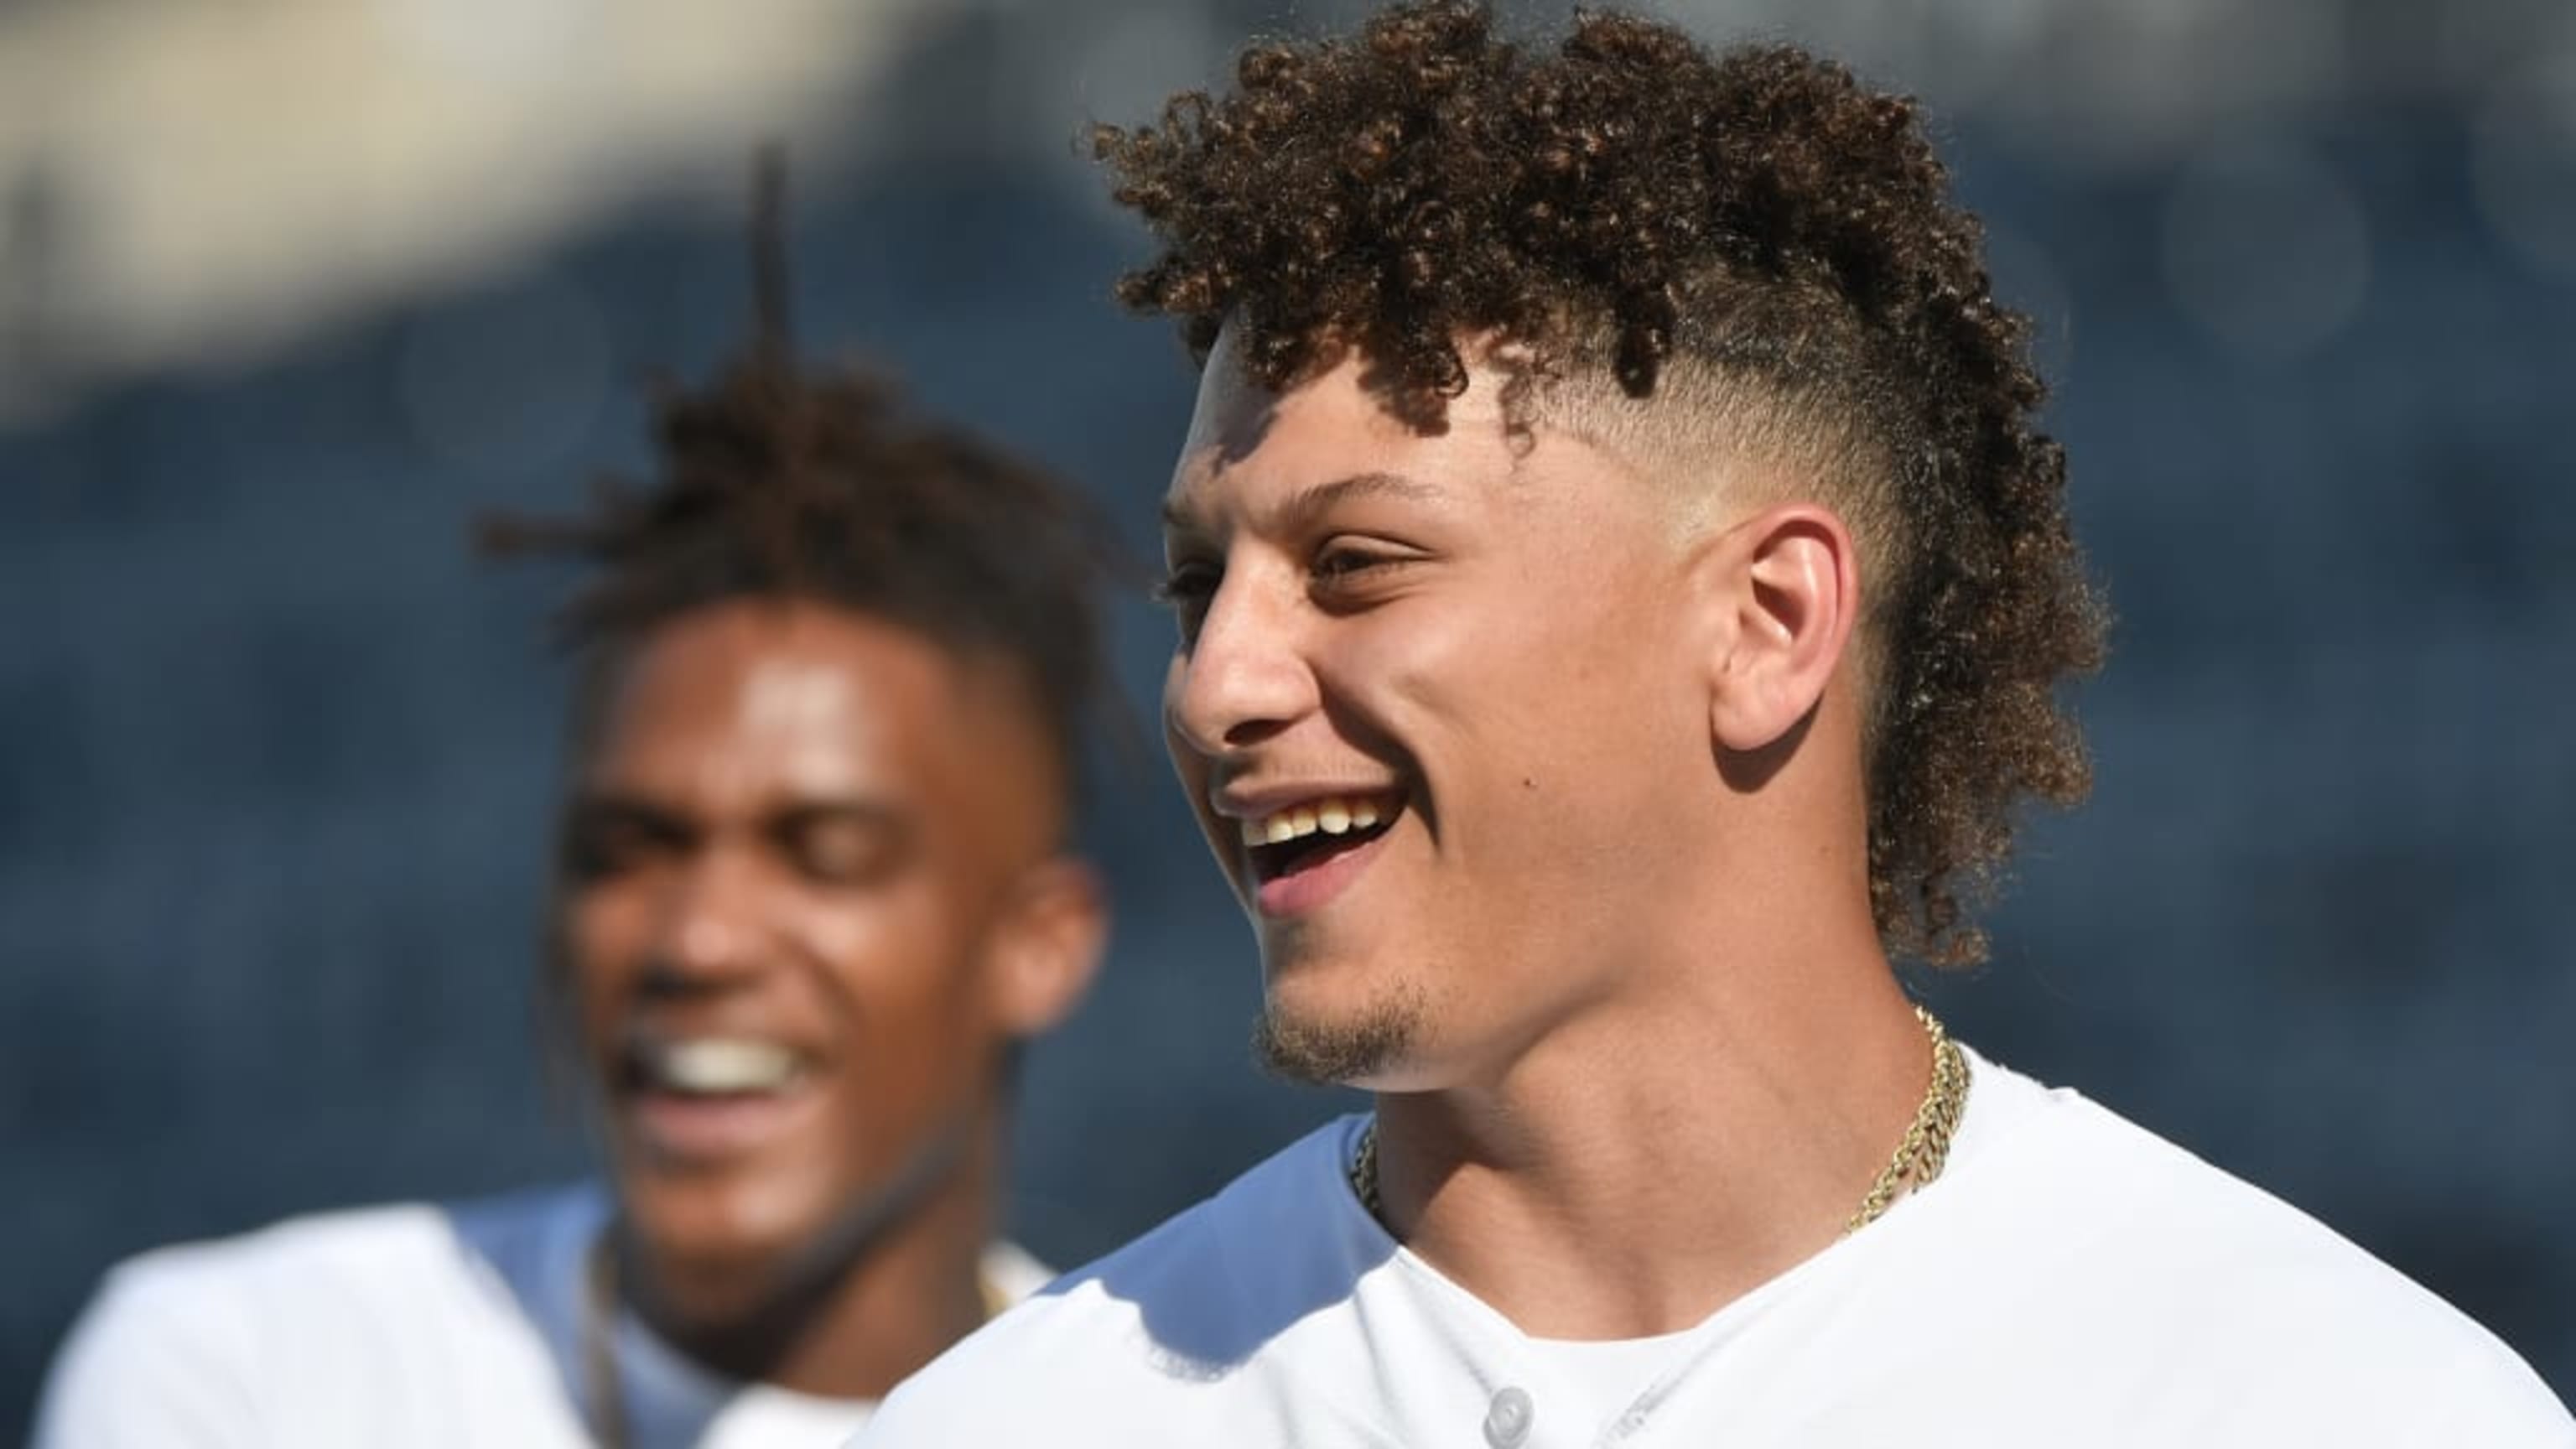 Tigers Scout Reflects On Drafting Patrick Mahomes